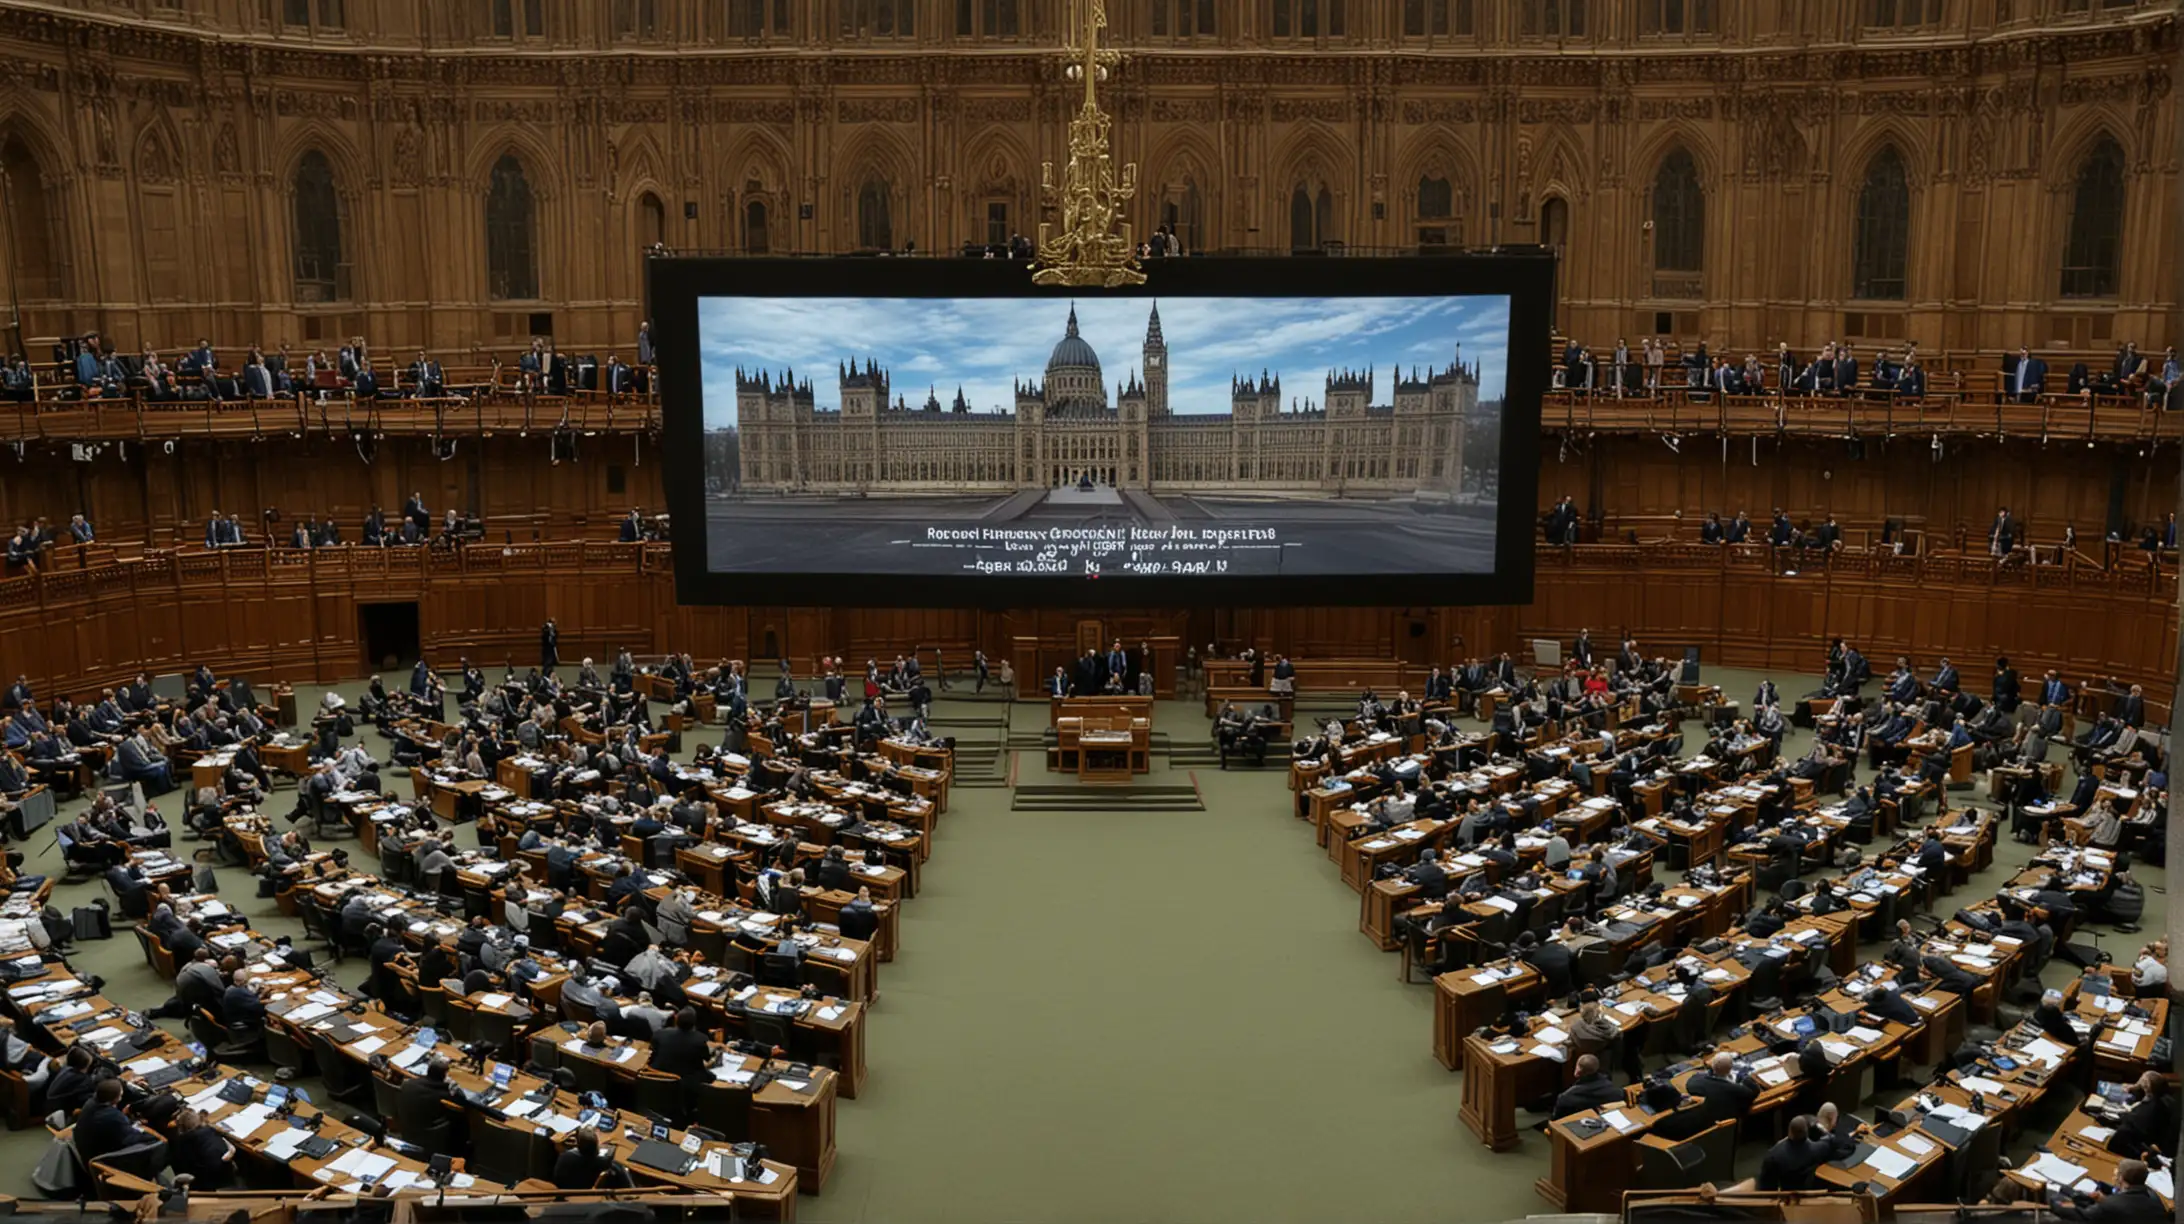 Parliament Hall Presentation Official Address on the Screen